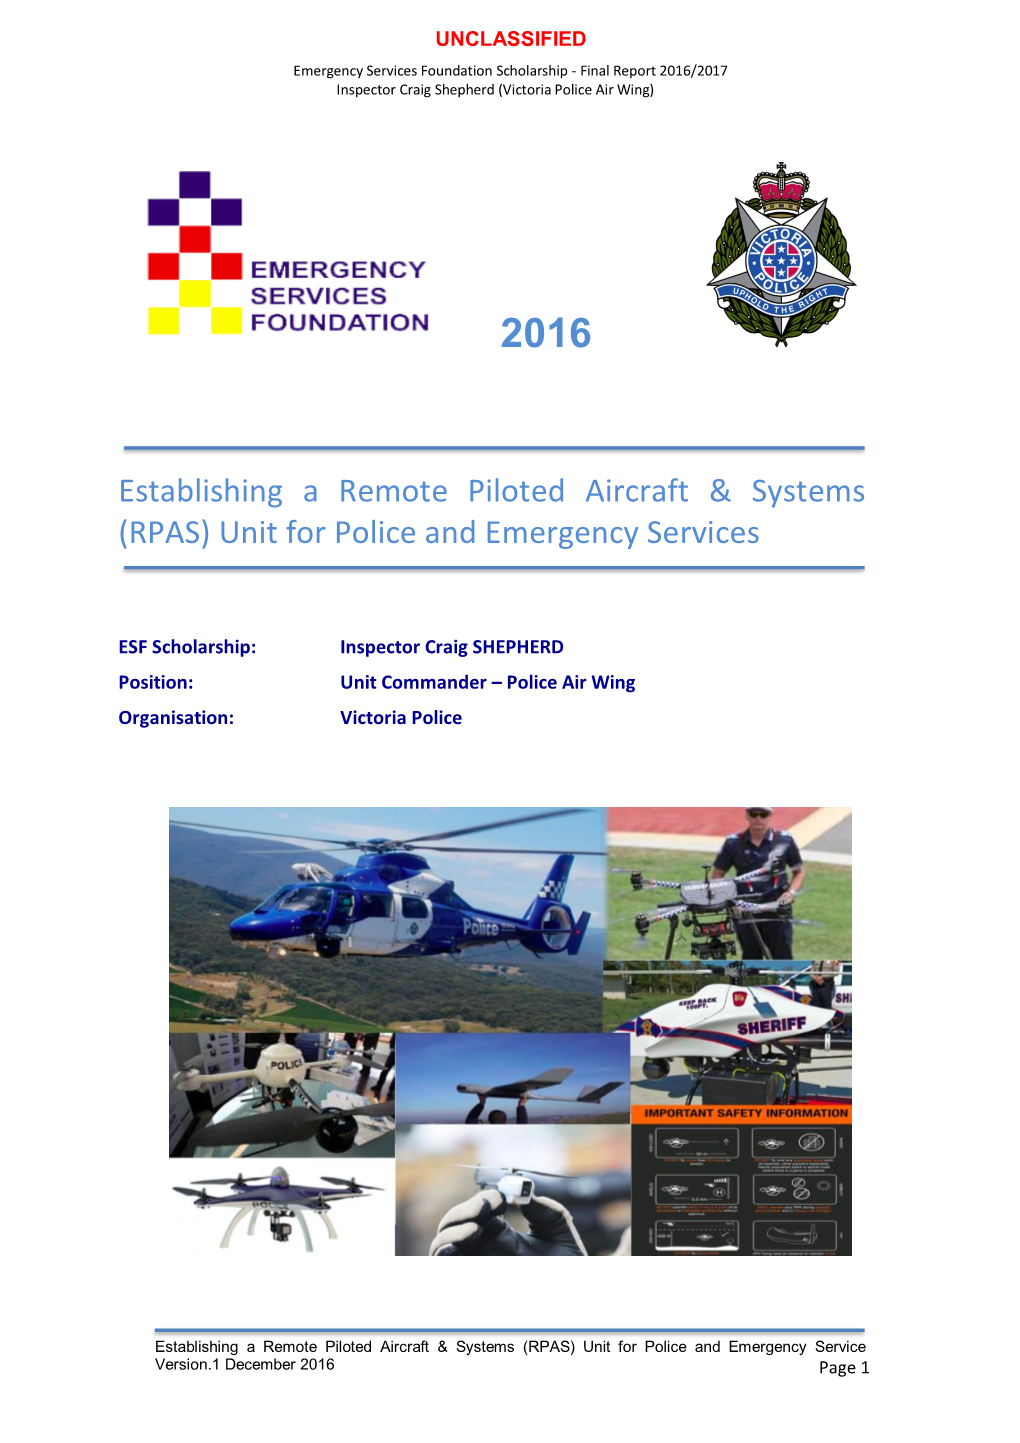 Establishing a Remote Piloted Aircraft & Systems (RPAS) Unit for Police